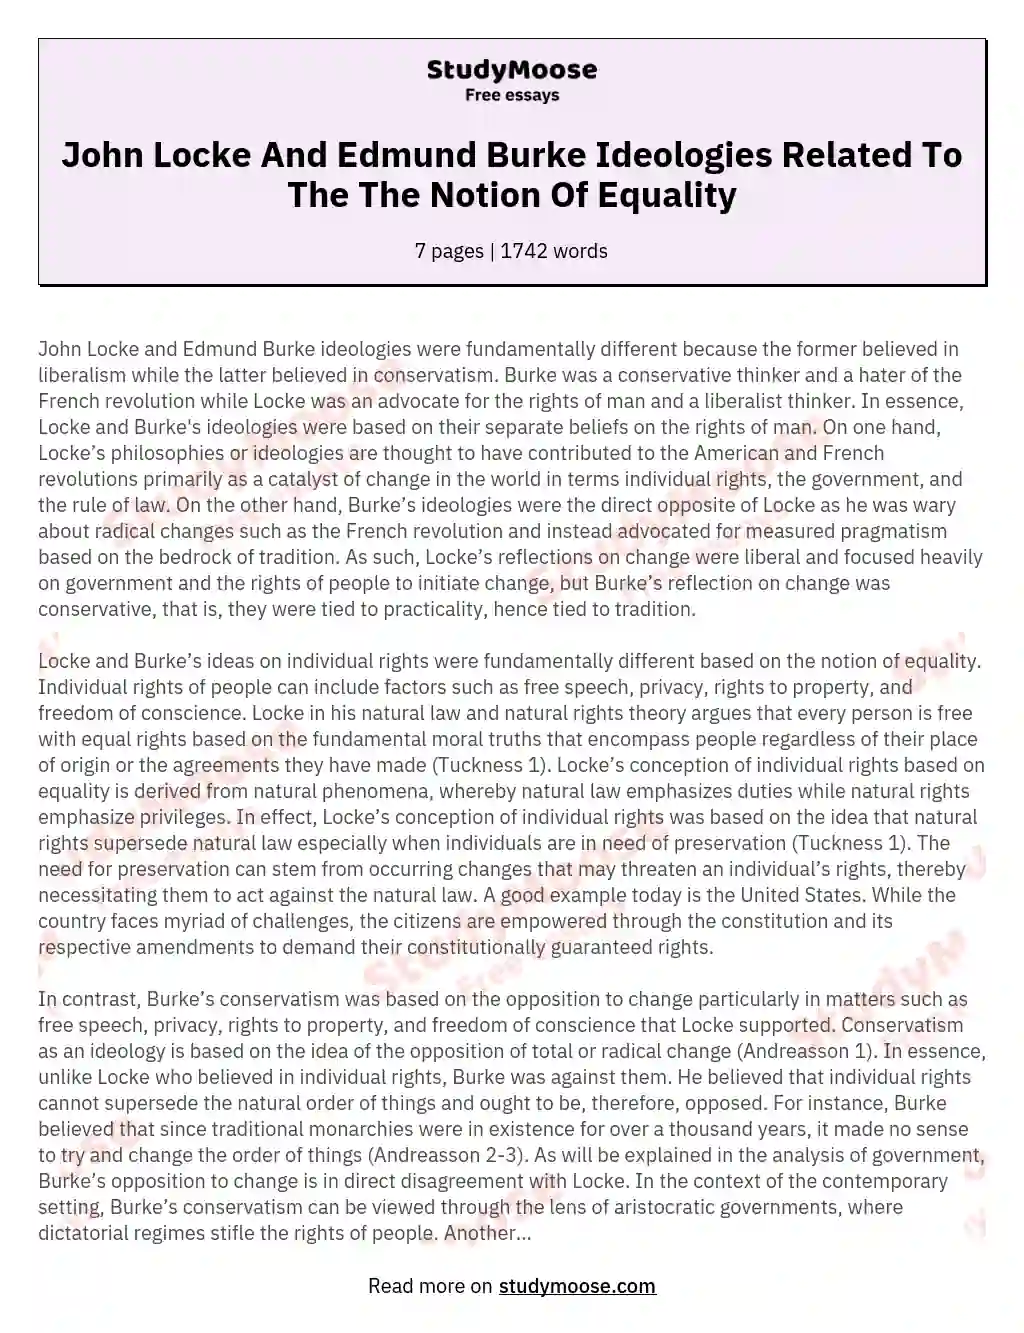 John Locke And Edmund Burke Ideologies Related To The The Notion Of Equality essay